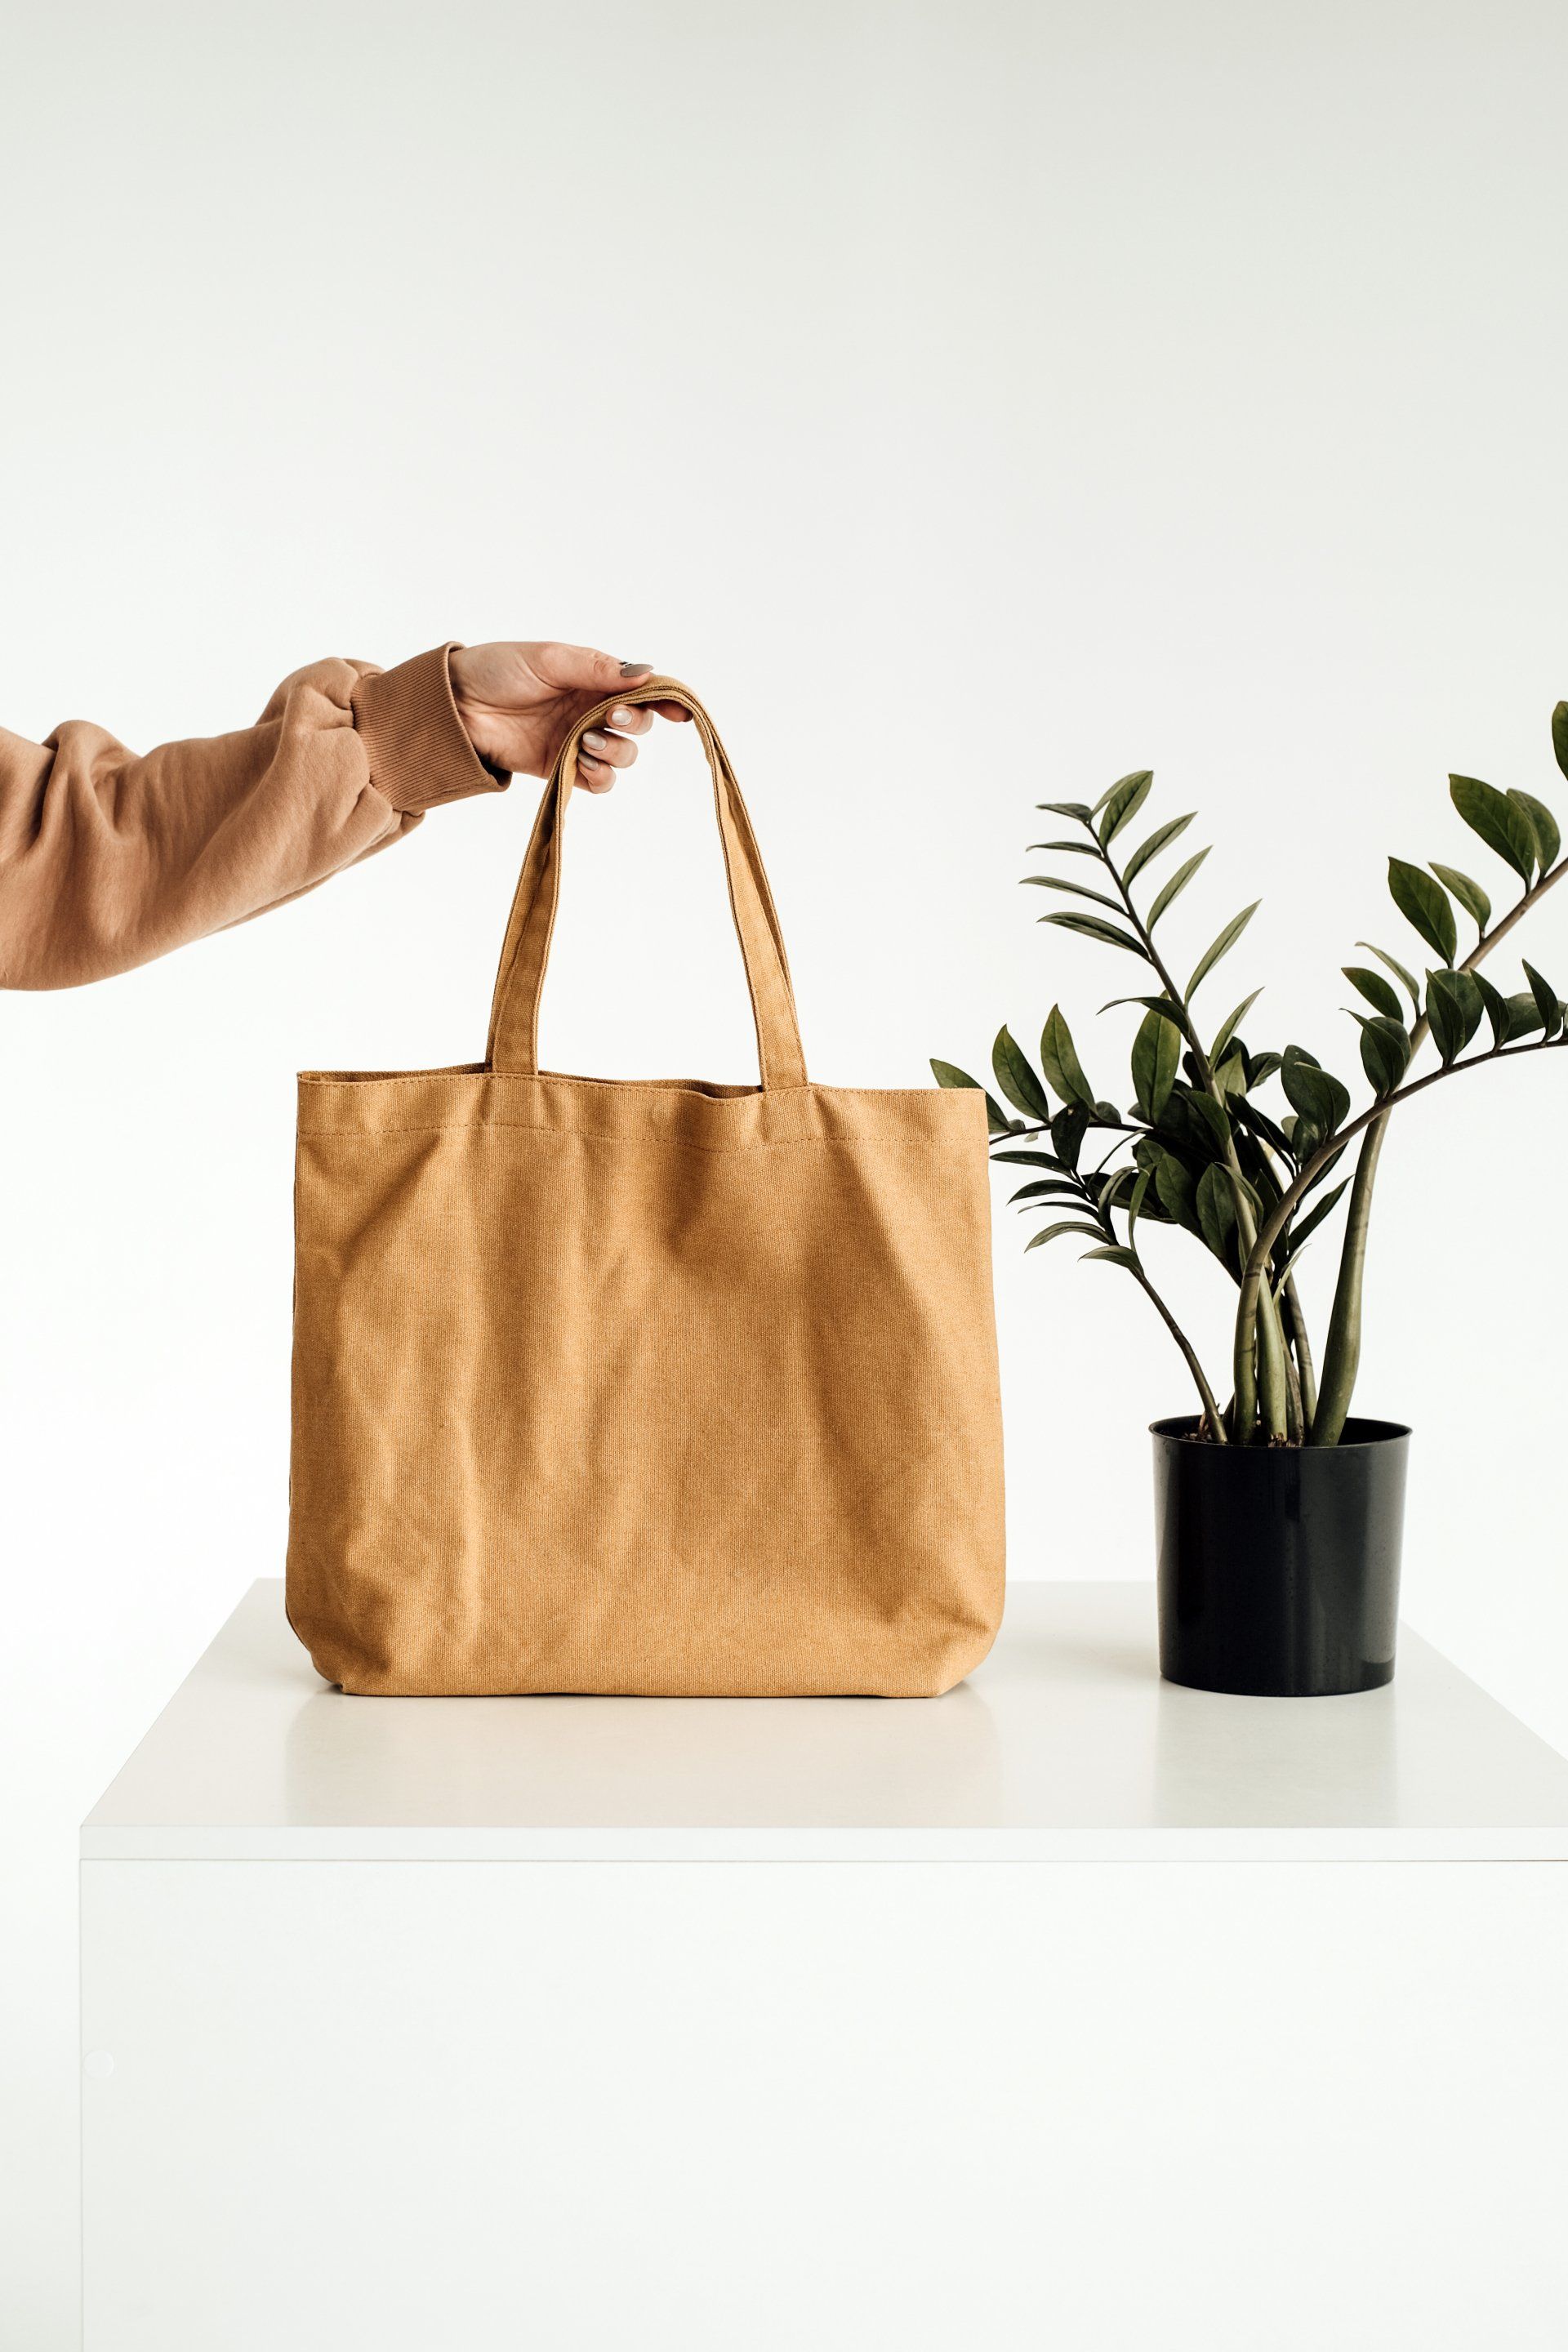 blank canvas tote bag